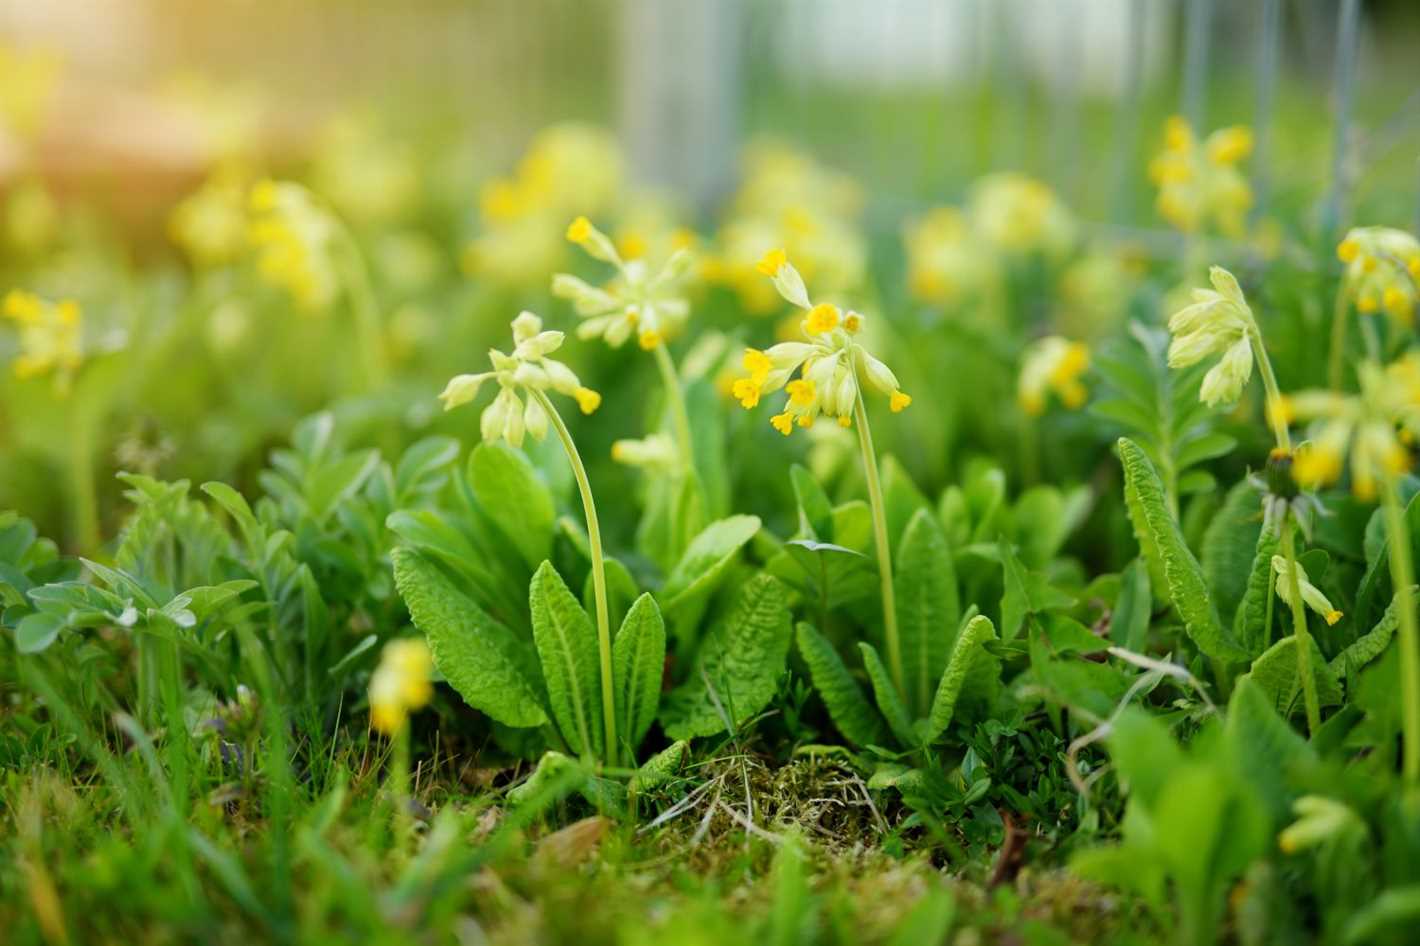 Why is Cowslip Popular?